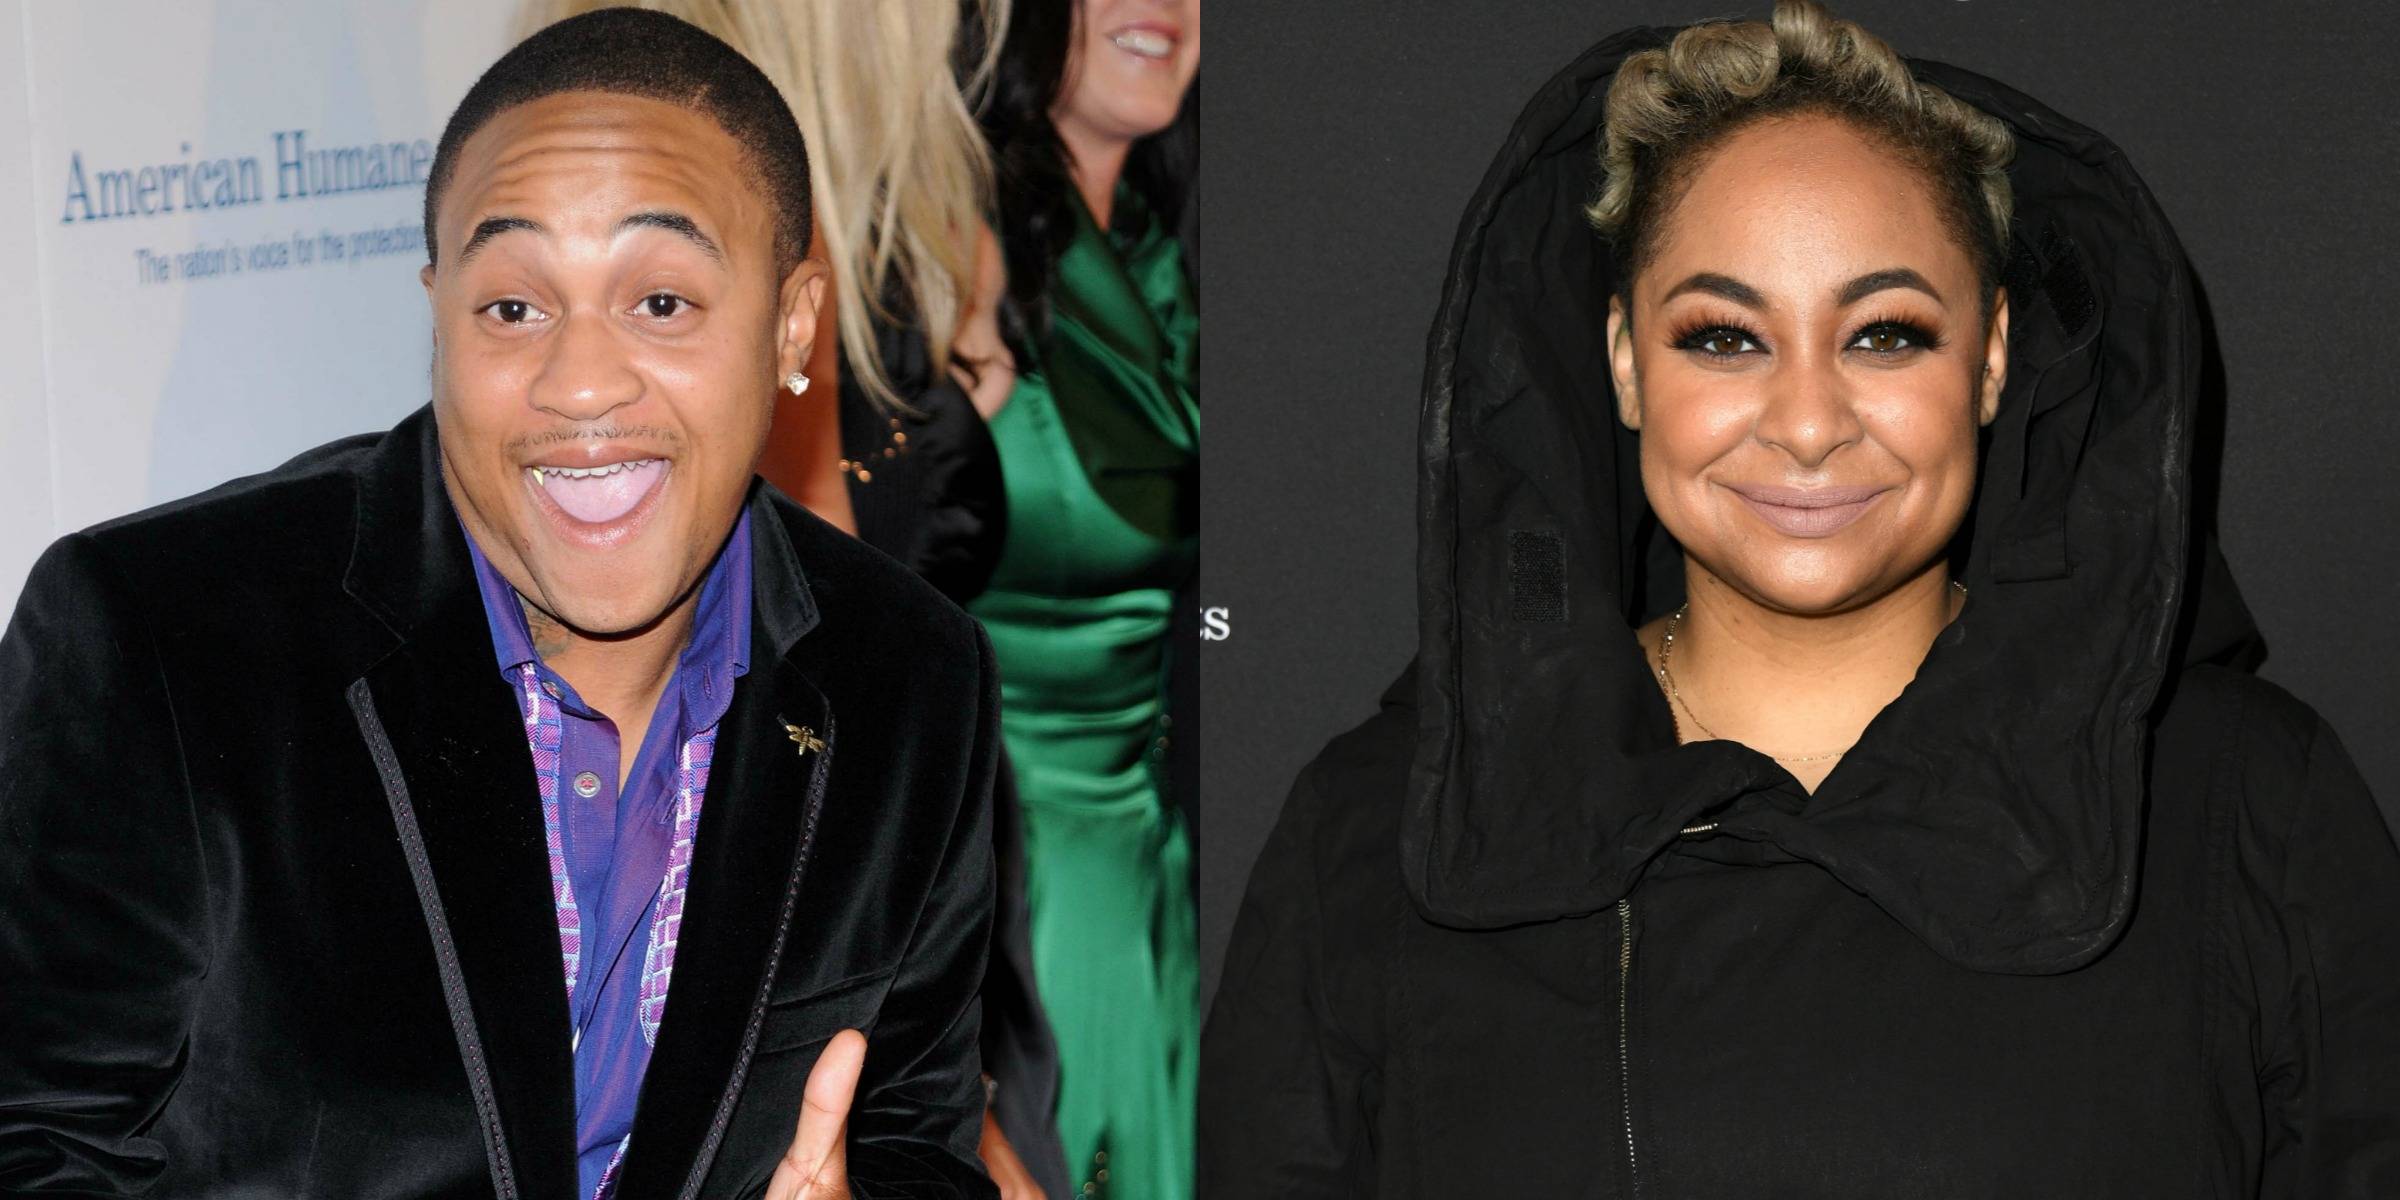 Who Is Orlando Brown's Wife? Meet His Wife Raven Symone!